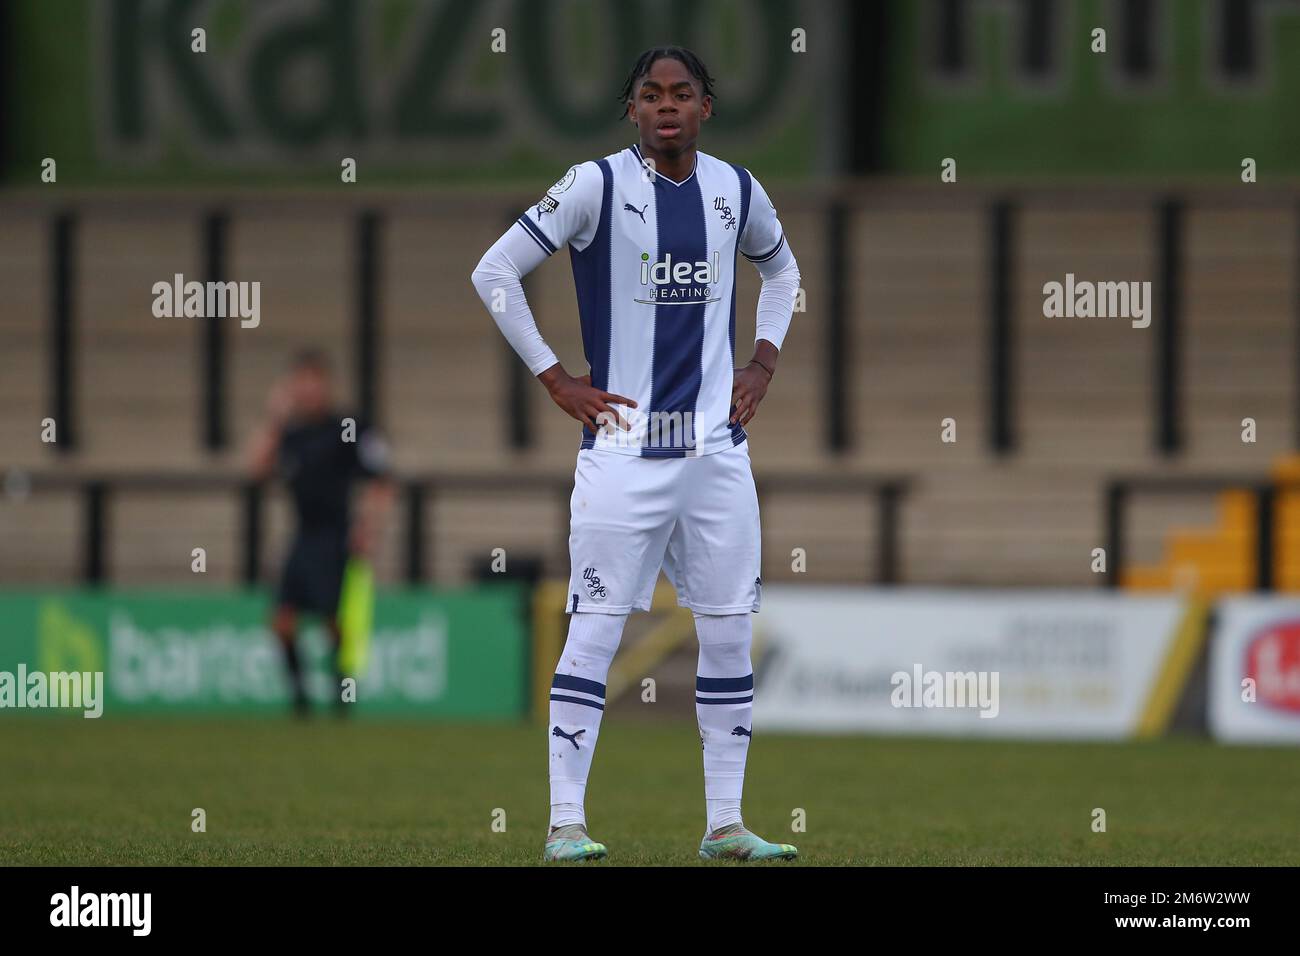 Hednesford, UK. 05th Jan, 2023. Akeel Higgins of West Bromwich Albion during the Premier League Cup match West Bromwich Albion vs Middlesbrough U23's at Keys Park, Hednesford, United Kingdom, 5th January 2023 (Photo by Gareth Evans/News Images) Credit: News Images LTD/Alamy Live News Stock Photo